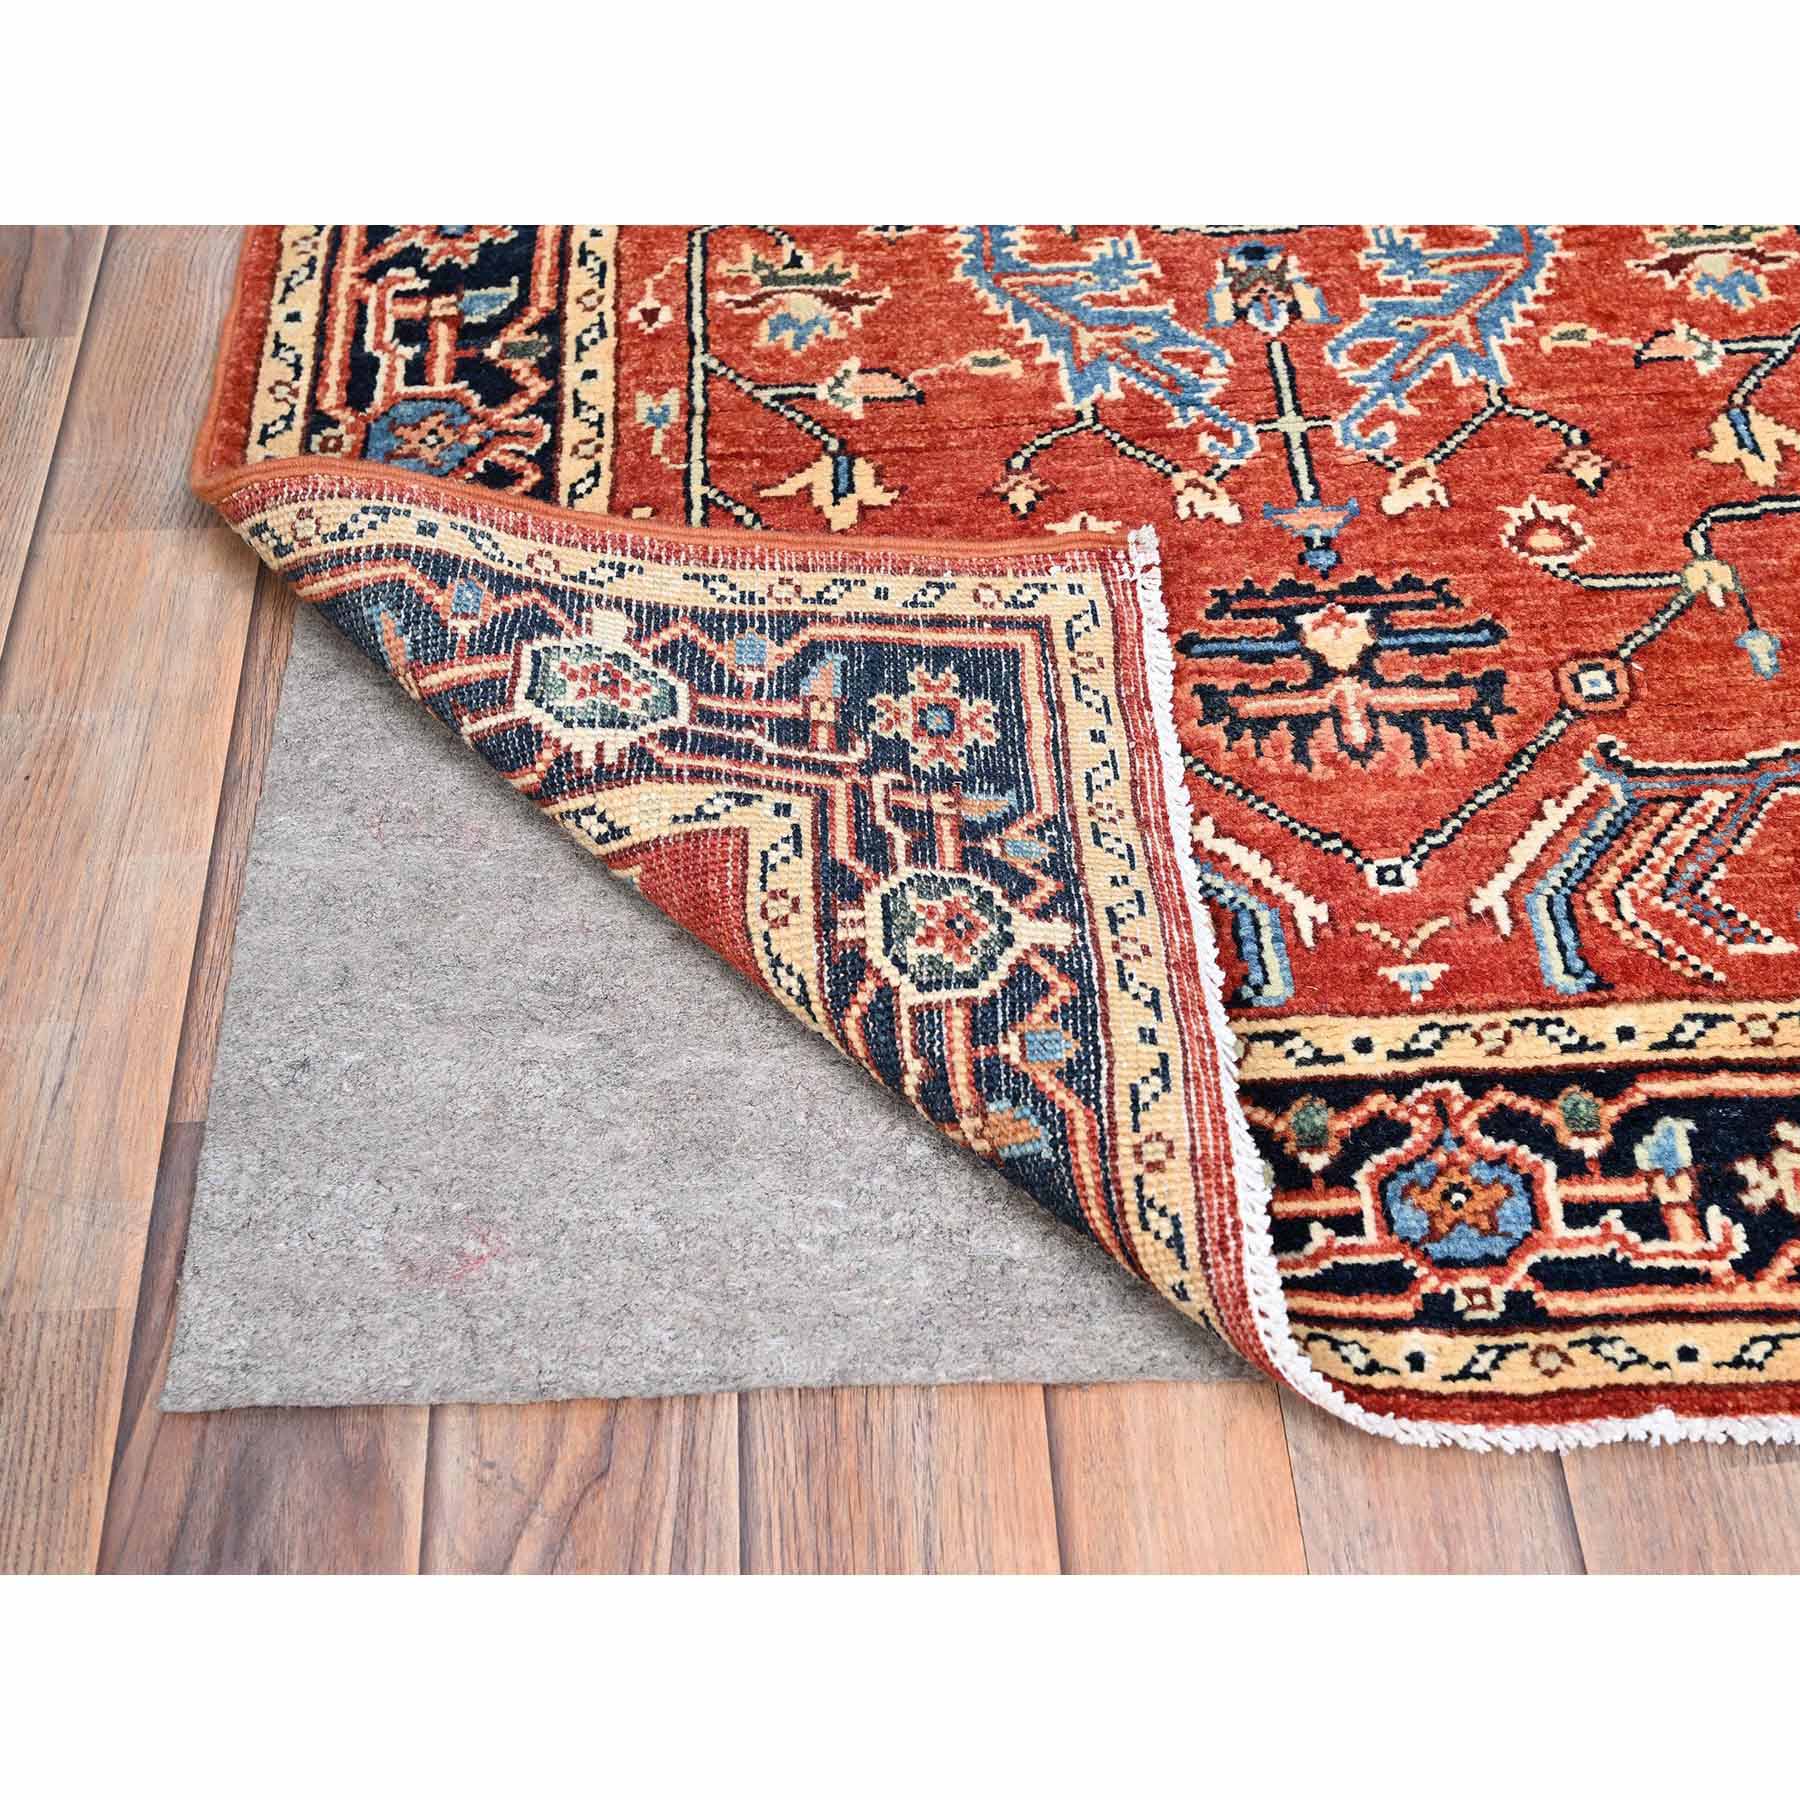 2'6x4'4 Red Ersari Area Rug 3x4 Afghan Hand Knotted Veg Dyes Wool